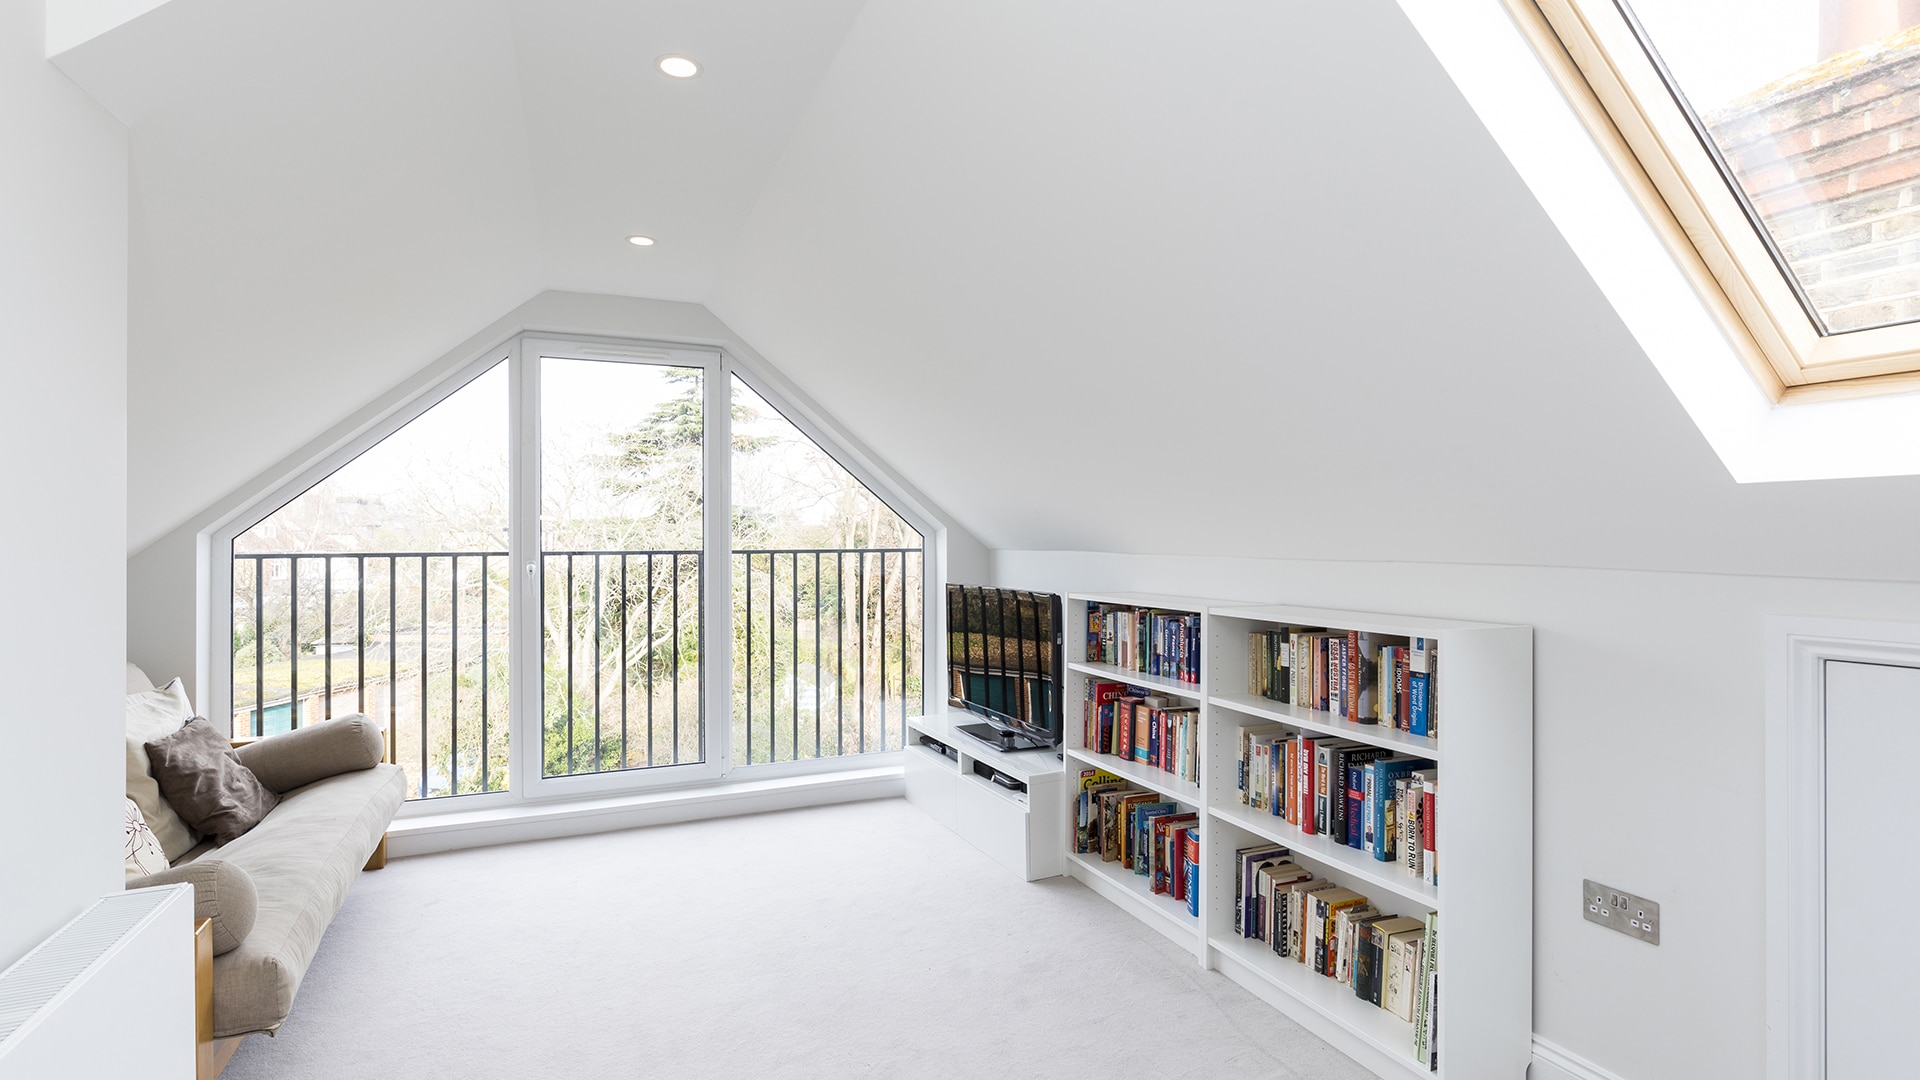 Loft Conversions – Add Extra Space to Your Home in the Most Cost Effective Way